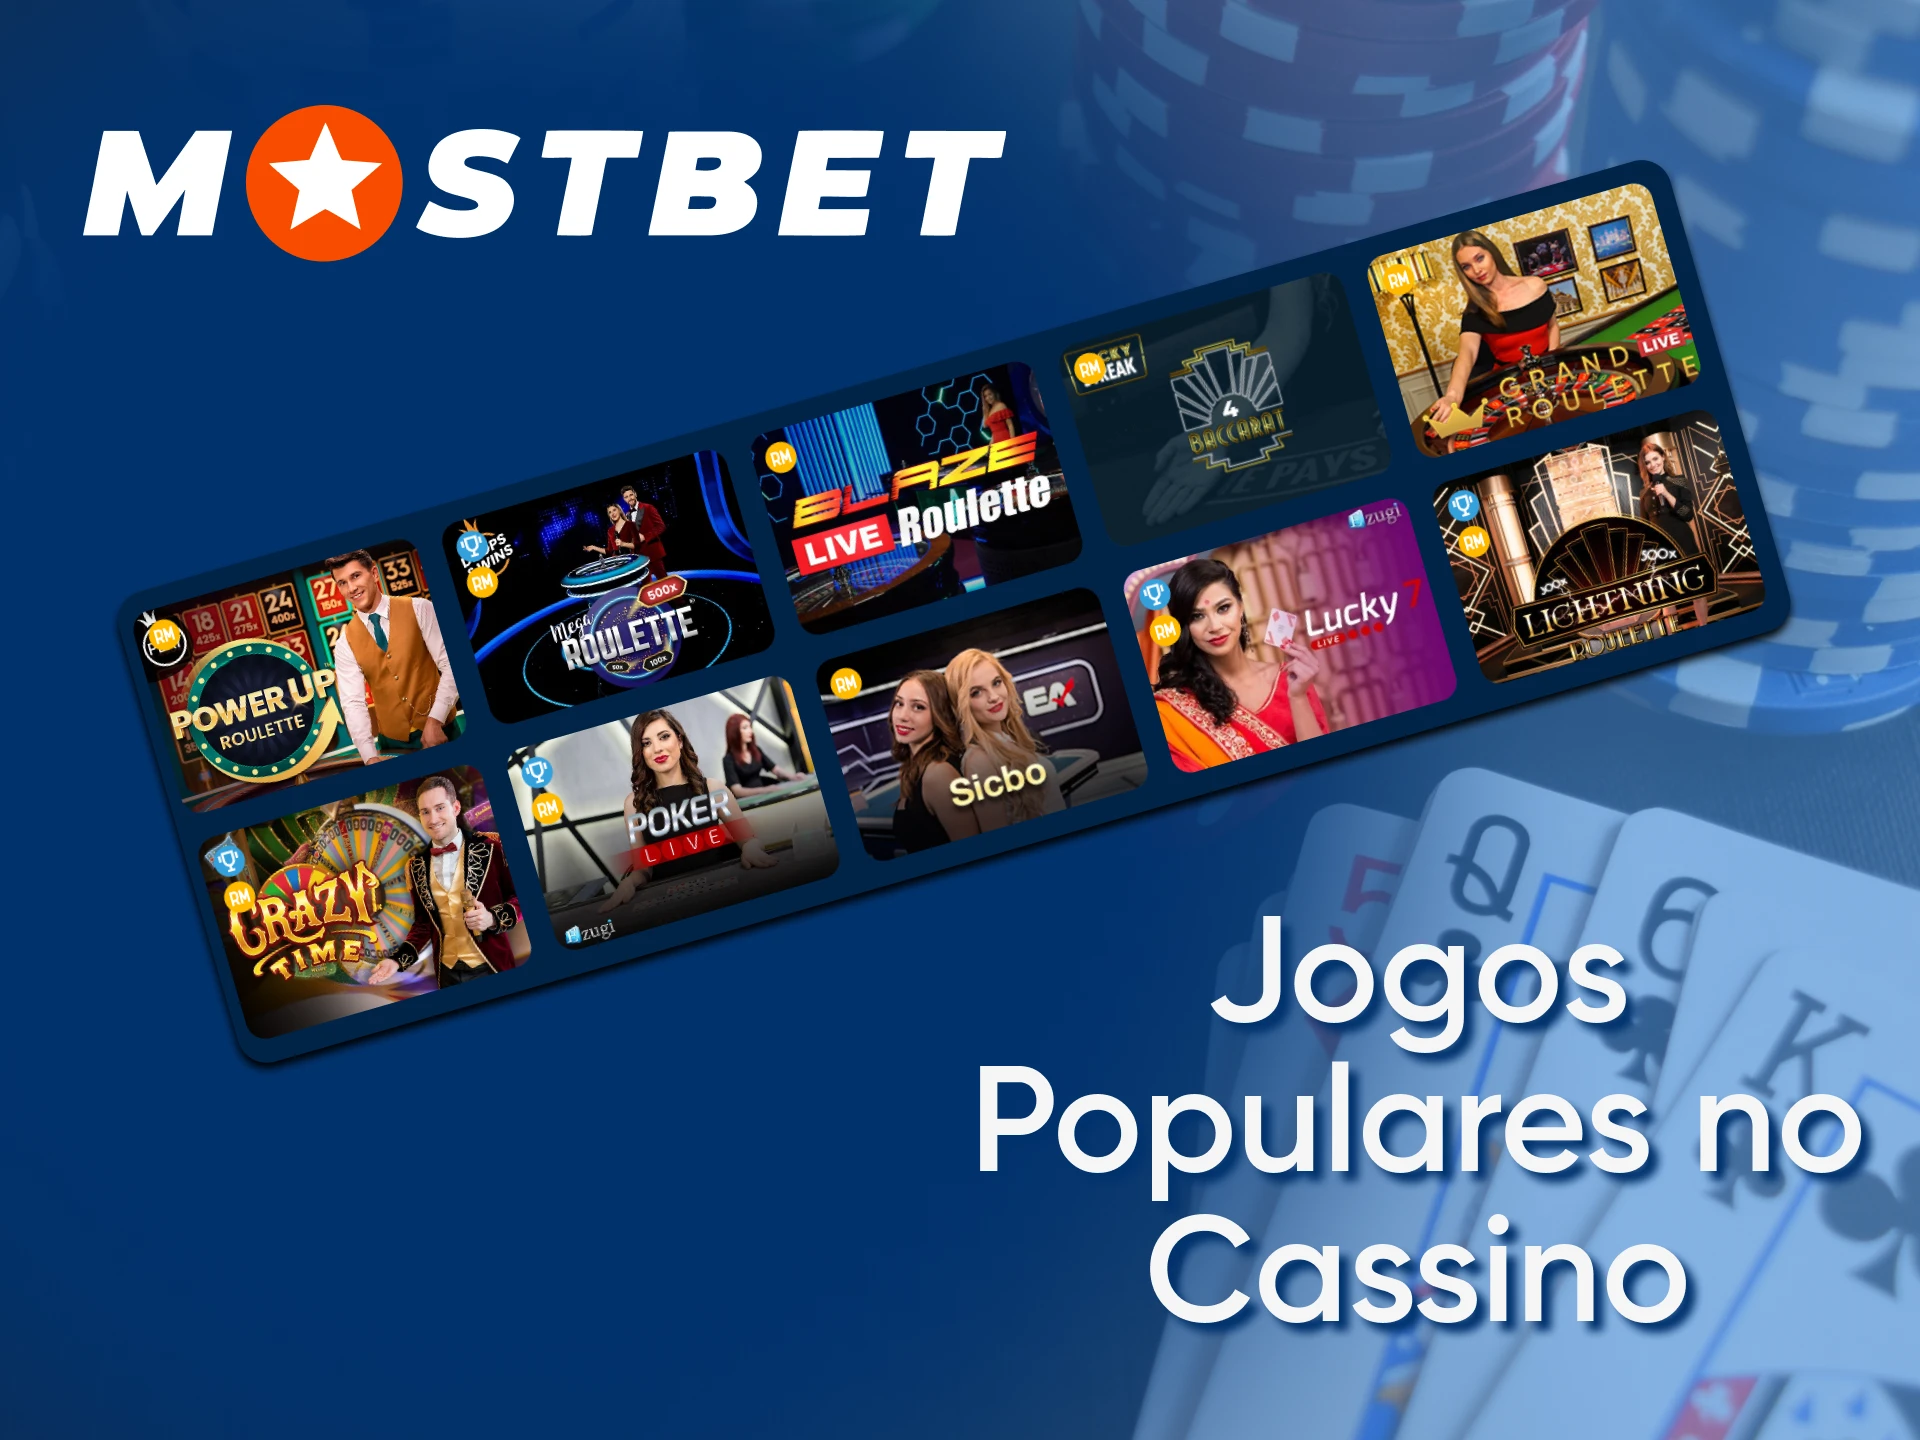 Mostbet online casino supports popular real money games.